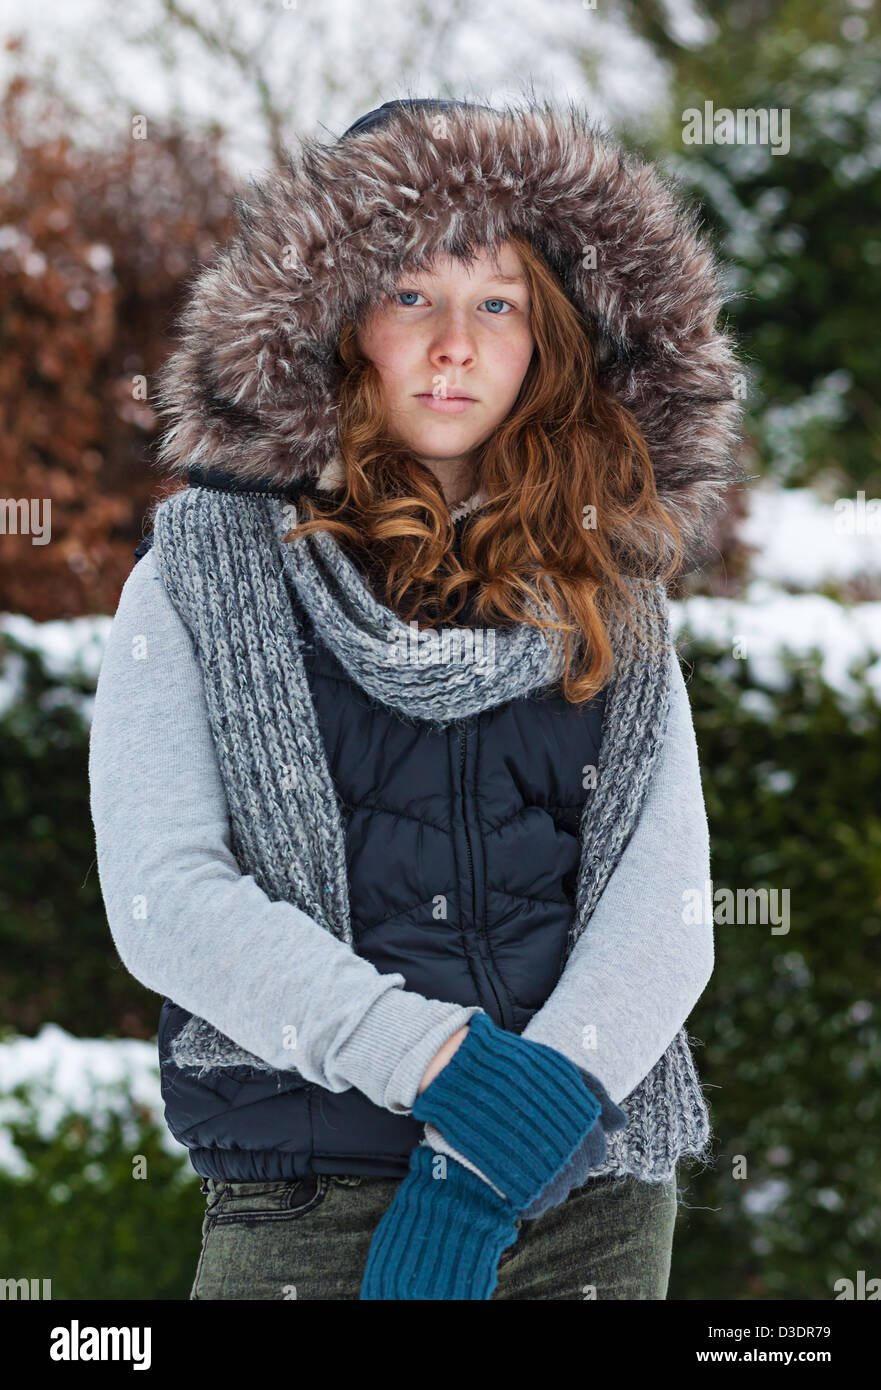 Outdoor portrait of a teenager girl in winter cloths Stock Photo